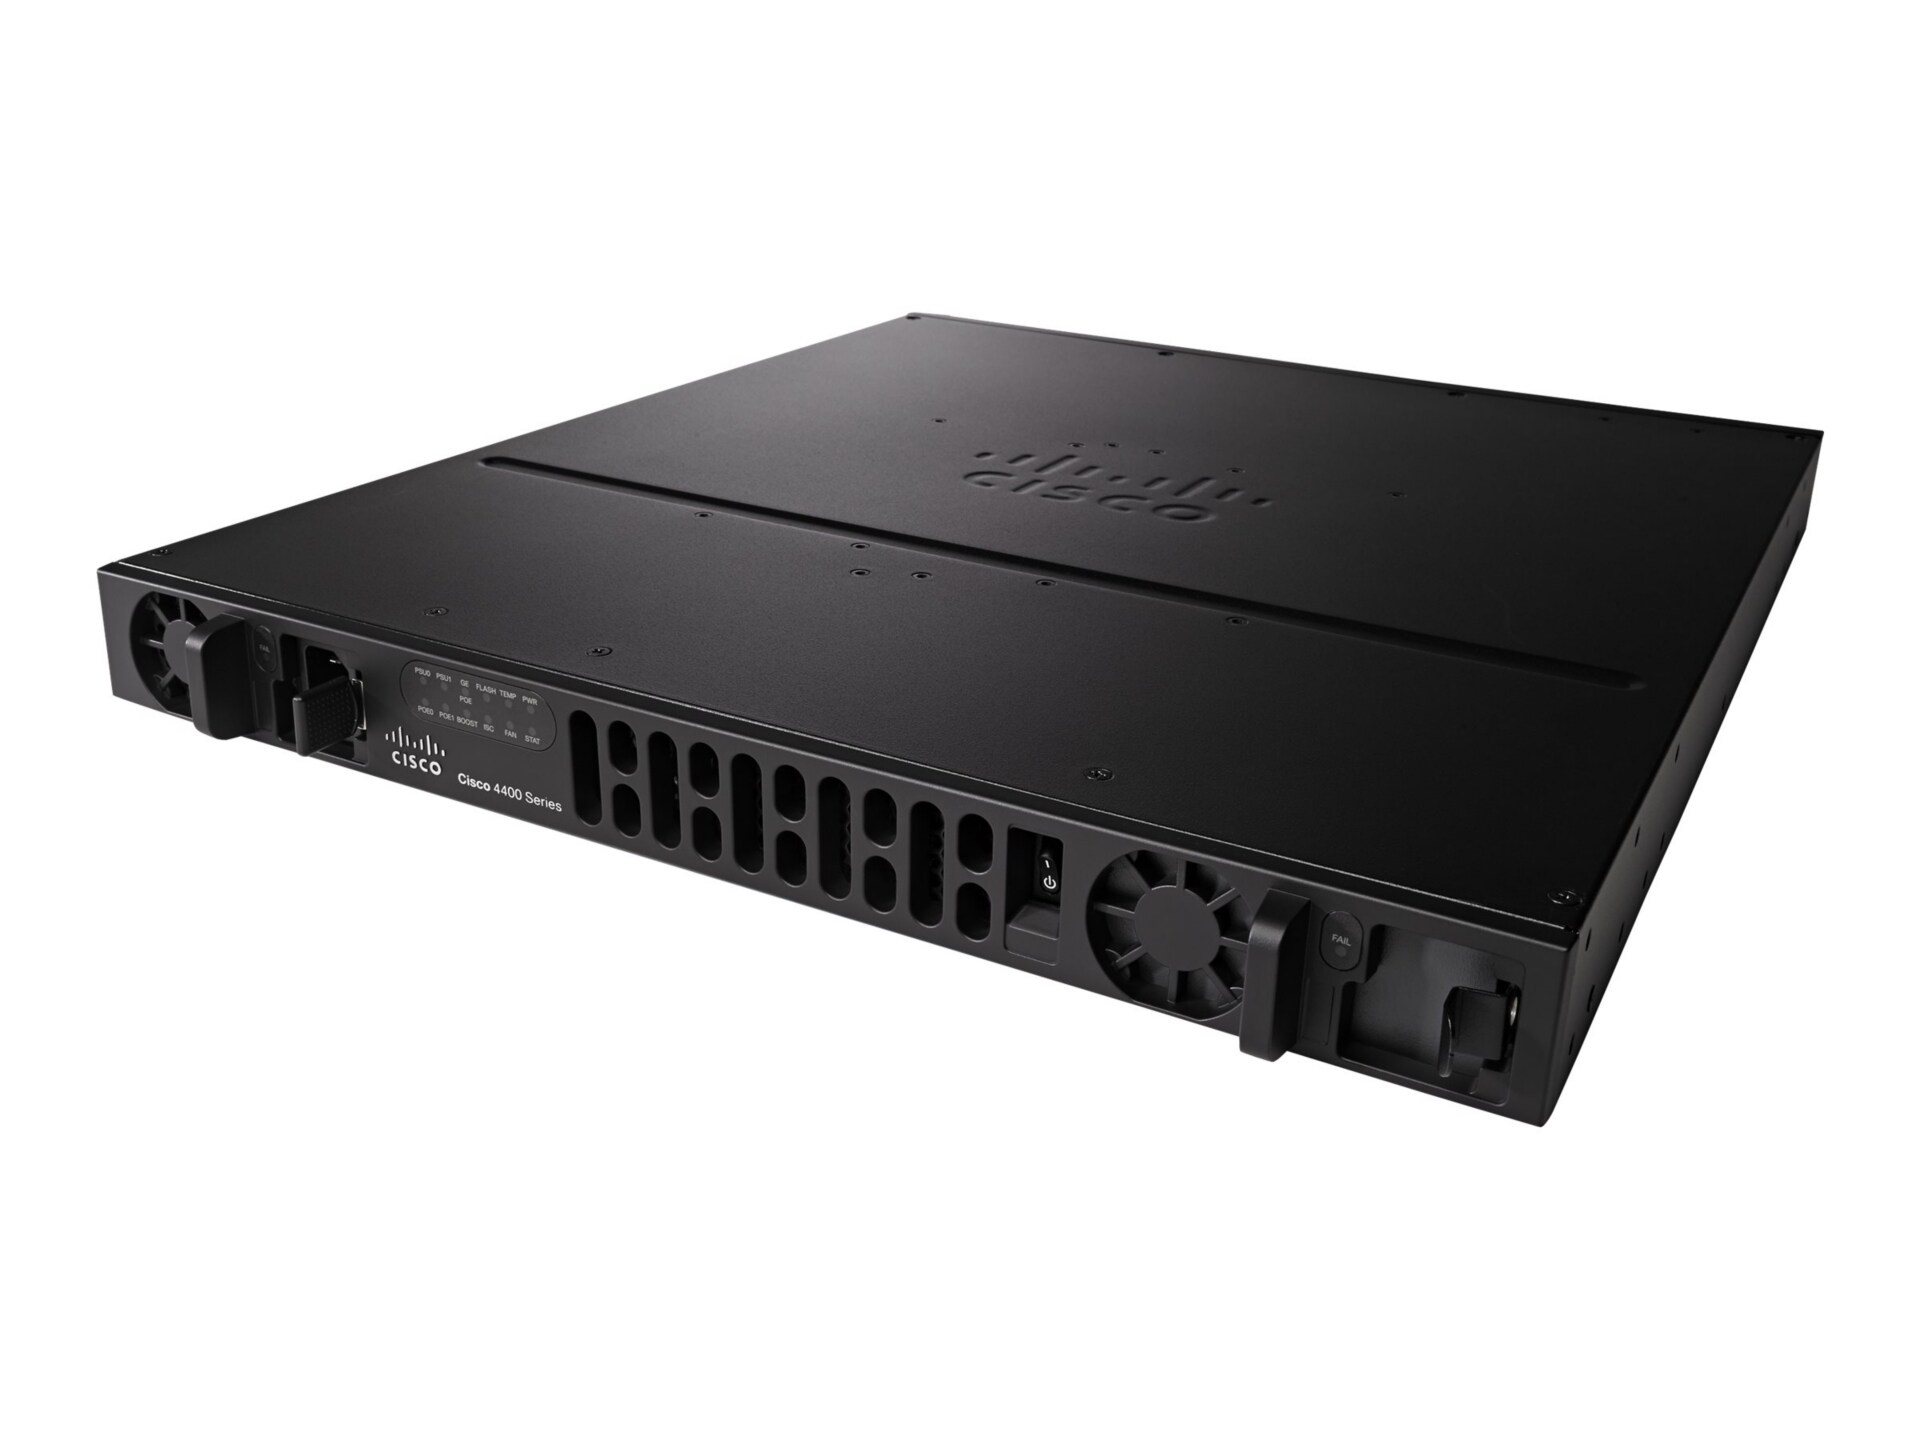 Cisco Integrated Services Router 4431 - Unified Communications Bundle - router - rack-mountable